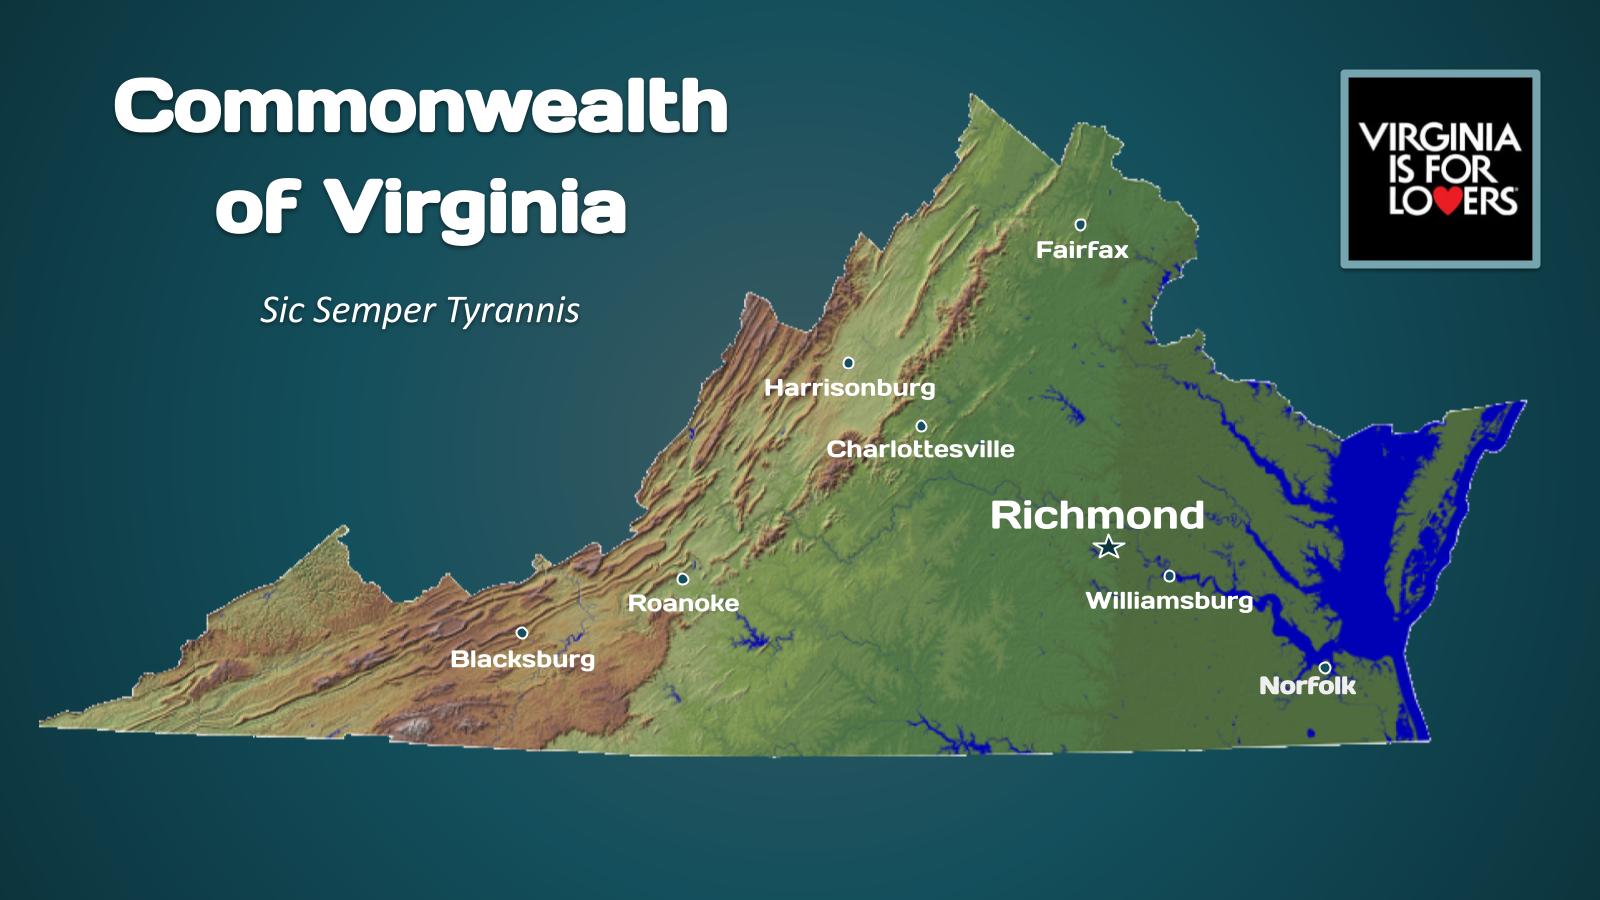 About Virginia